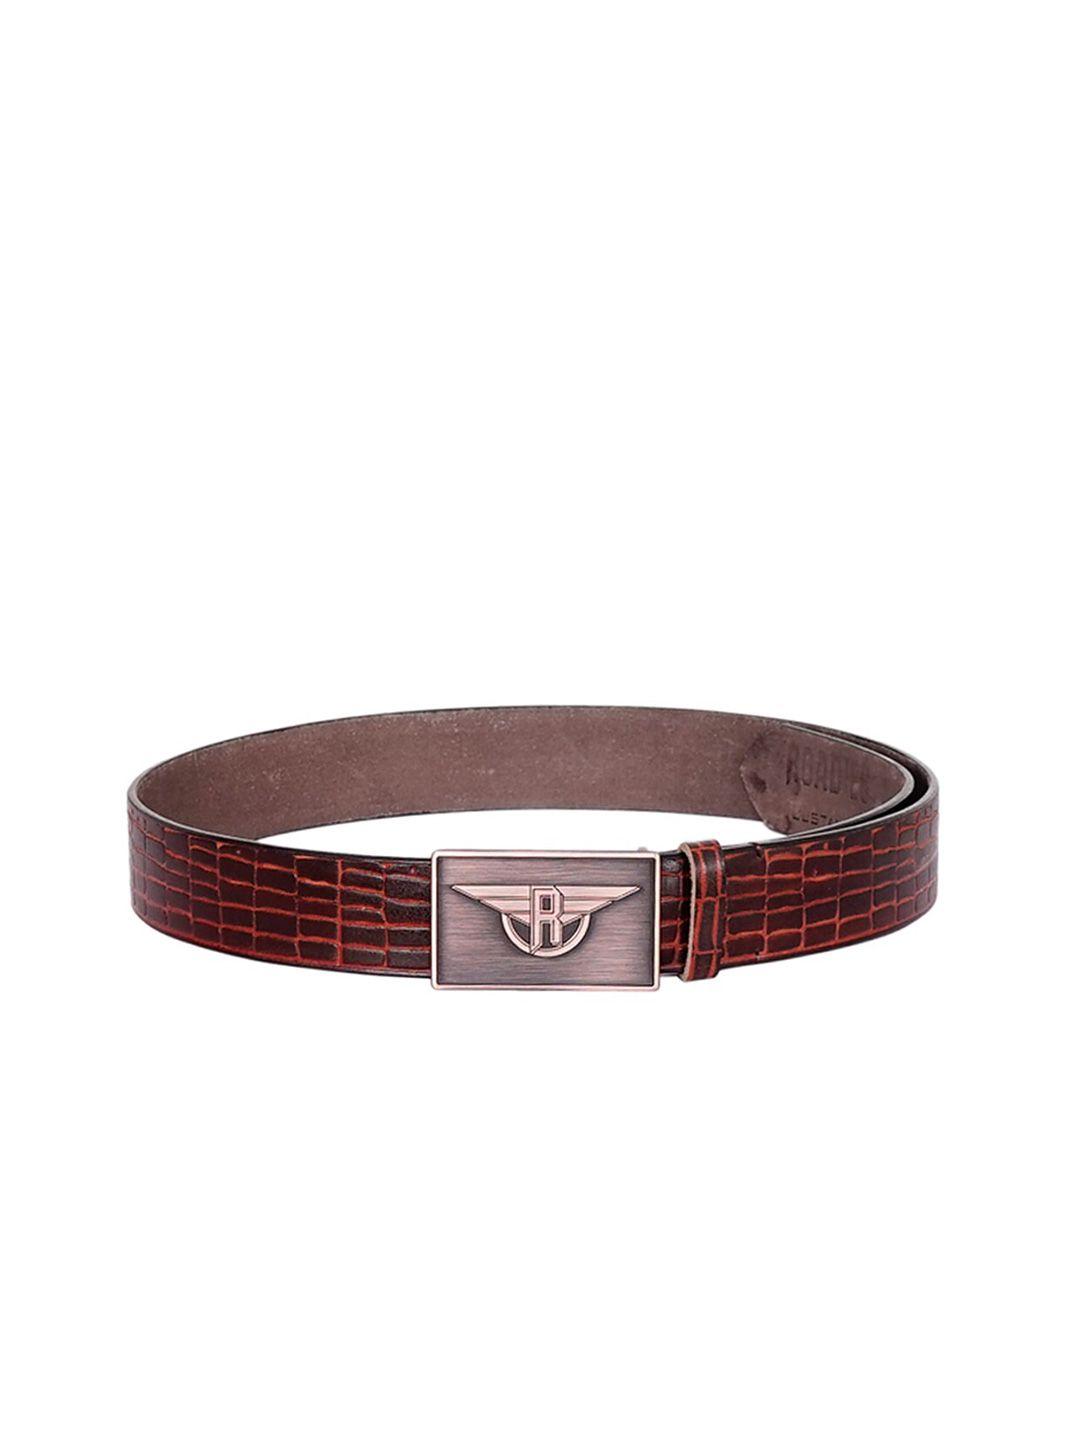 justanned men red textured casual leather belt